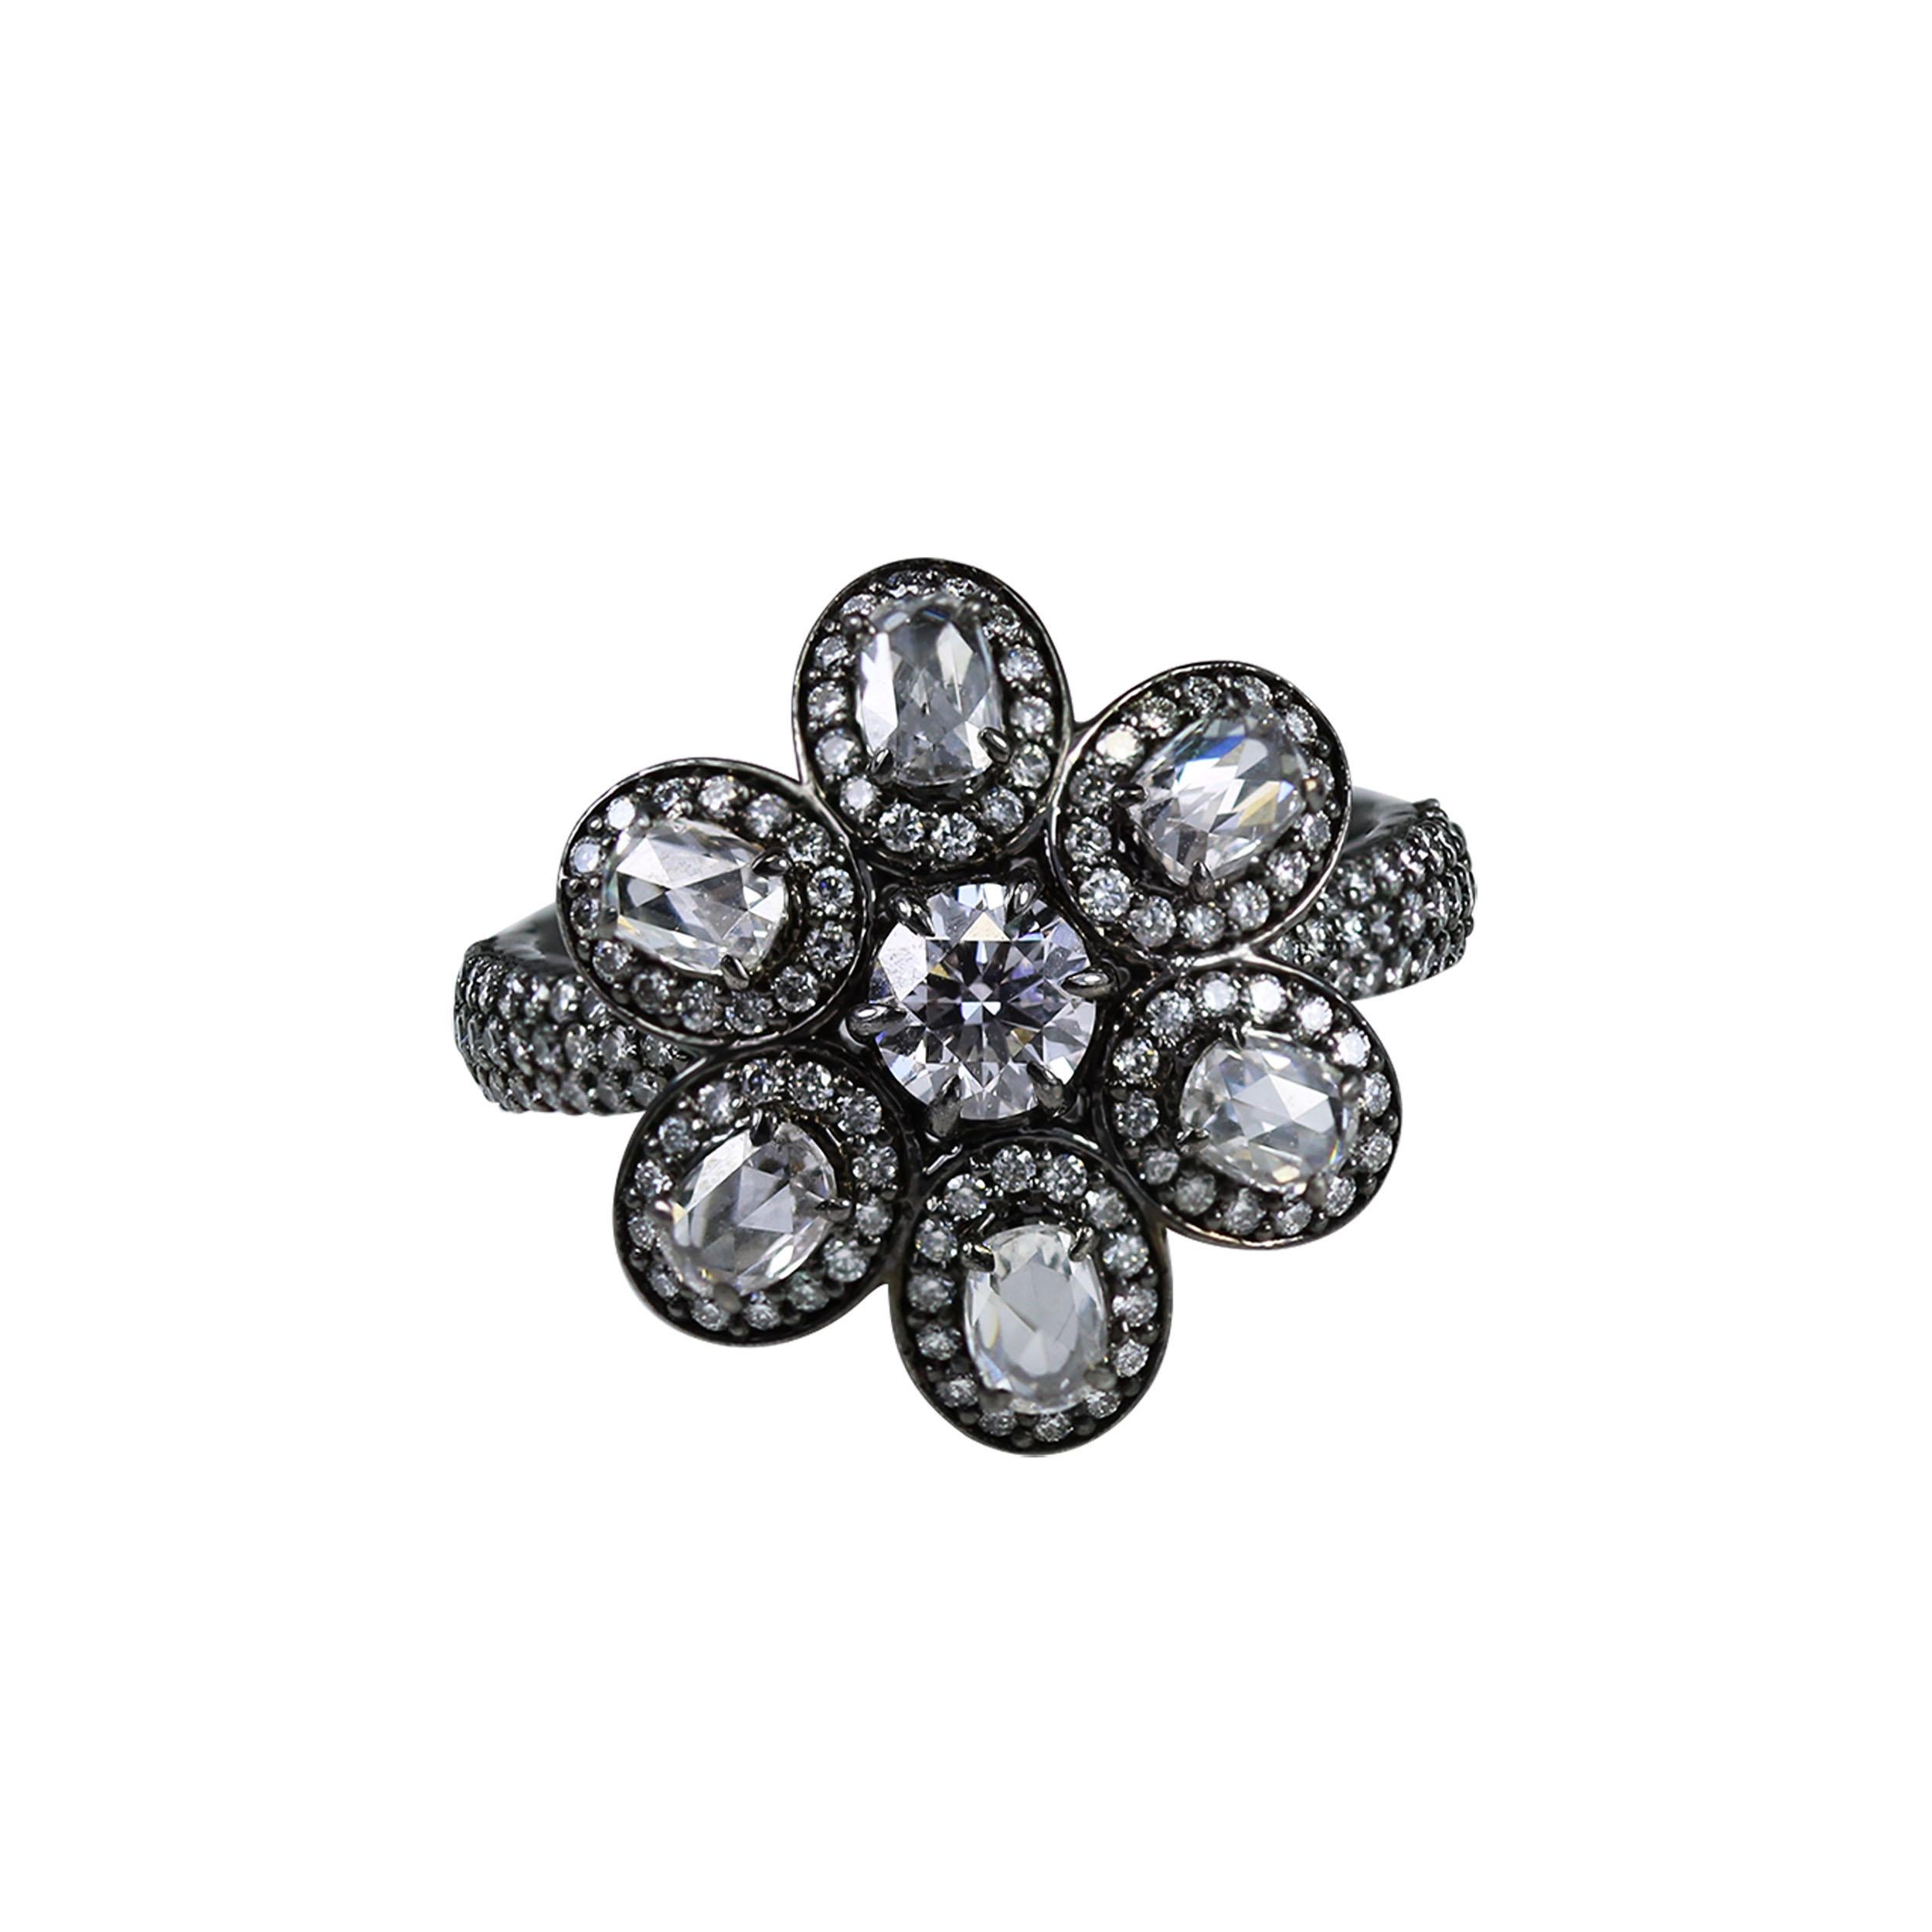 Diamond floral motif ring

Indulge yourself with this ultra-luxe 18K white gold ring in a floral motif, adorned with oval rose cut and round brilliant cut diamonds set in a delicate prong setting. Studded with 147 stones, this ring will easily form